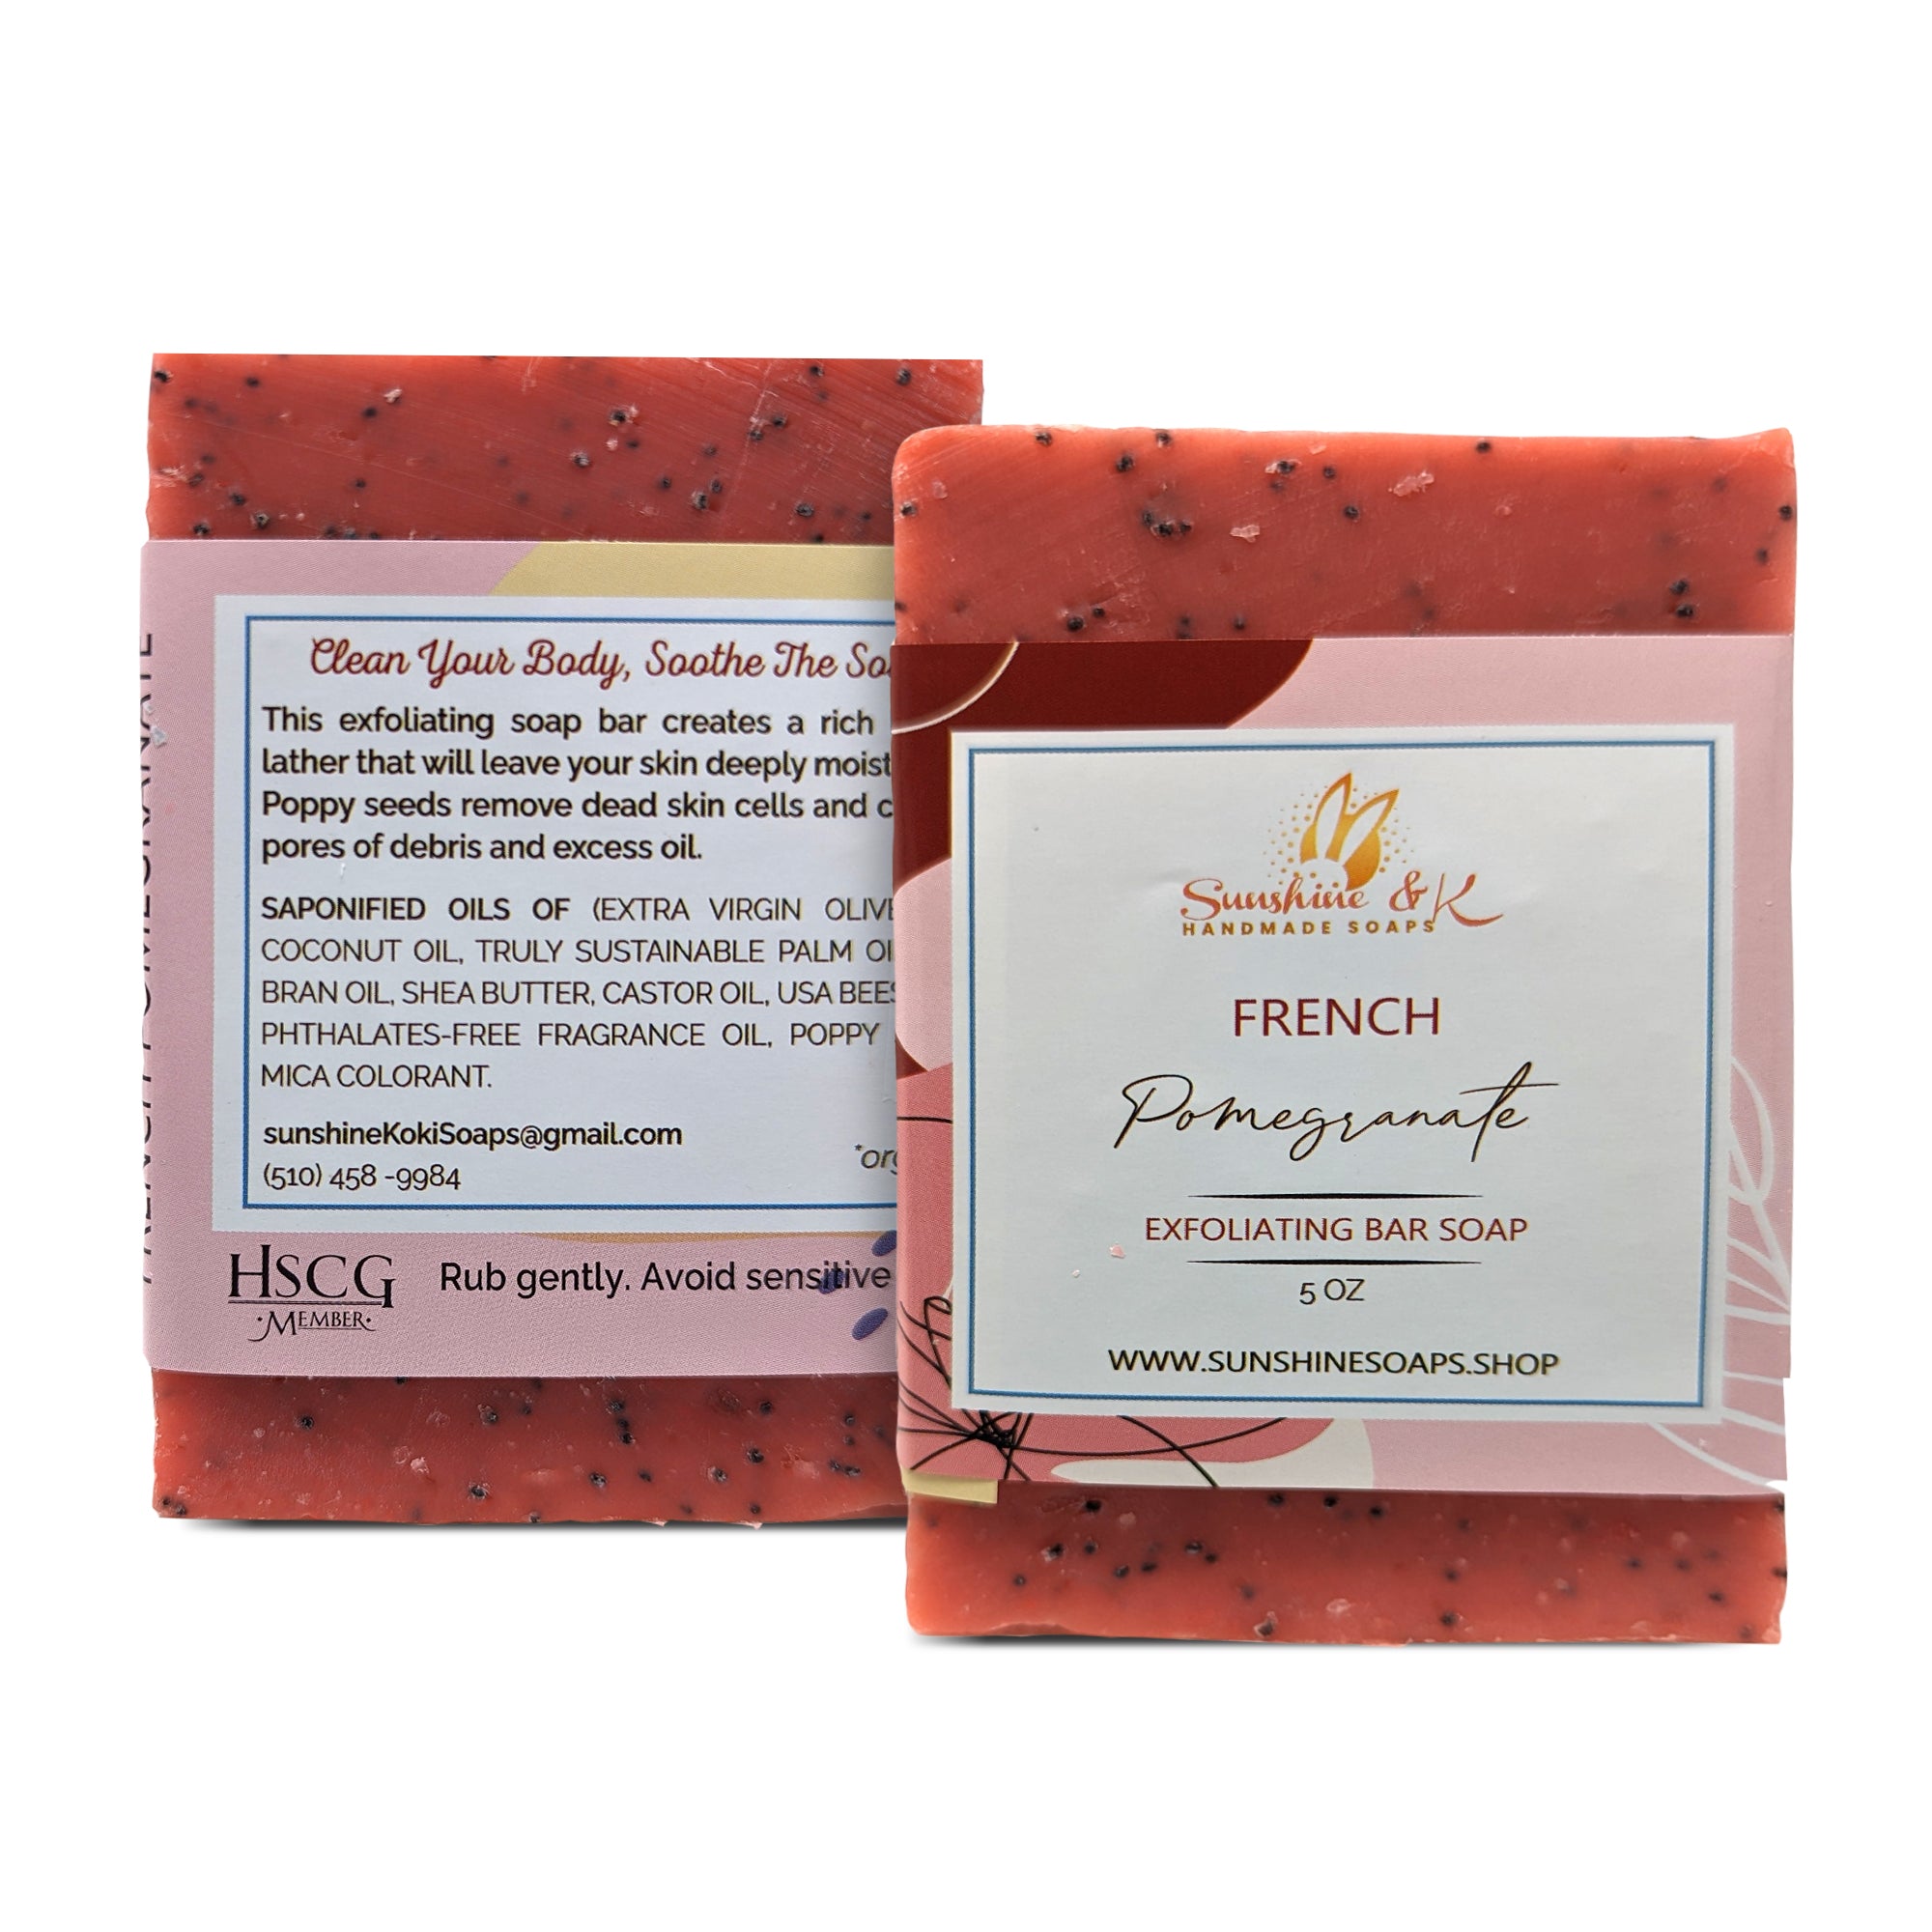 French Pomegranate Soap Bar - Exfoliating Soap, Bar Soap with Poppy Seeds & Shea Butter, Natural Base Oils Body Soap, Body Soap Bars with 6 Natural Base Oils, 5 oz - Sunshine & K Handmade Soaps - sunshine-handmade-soaps